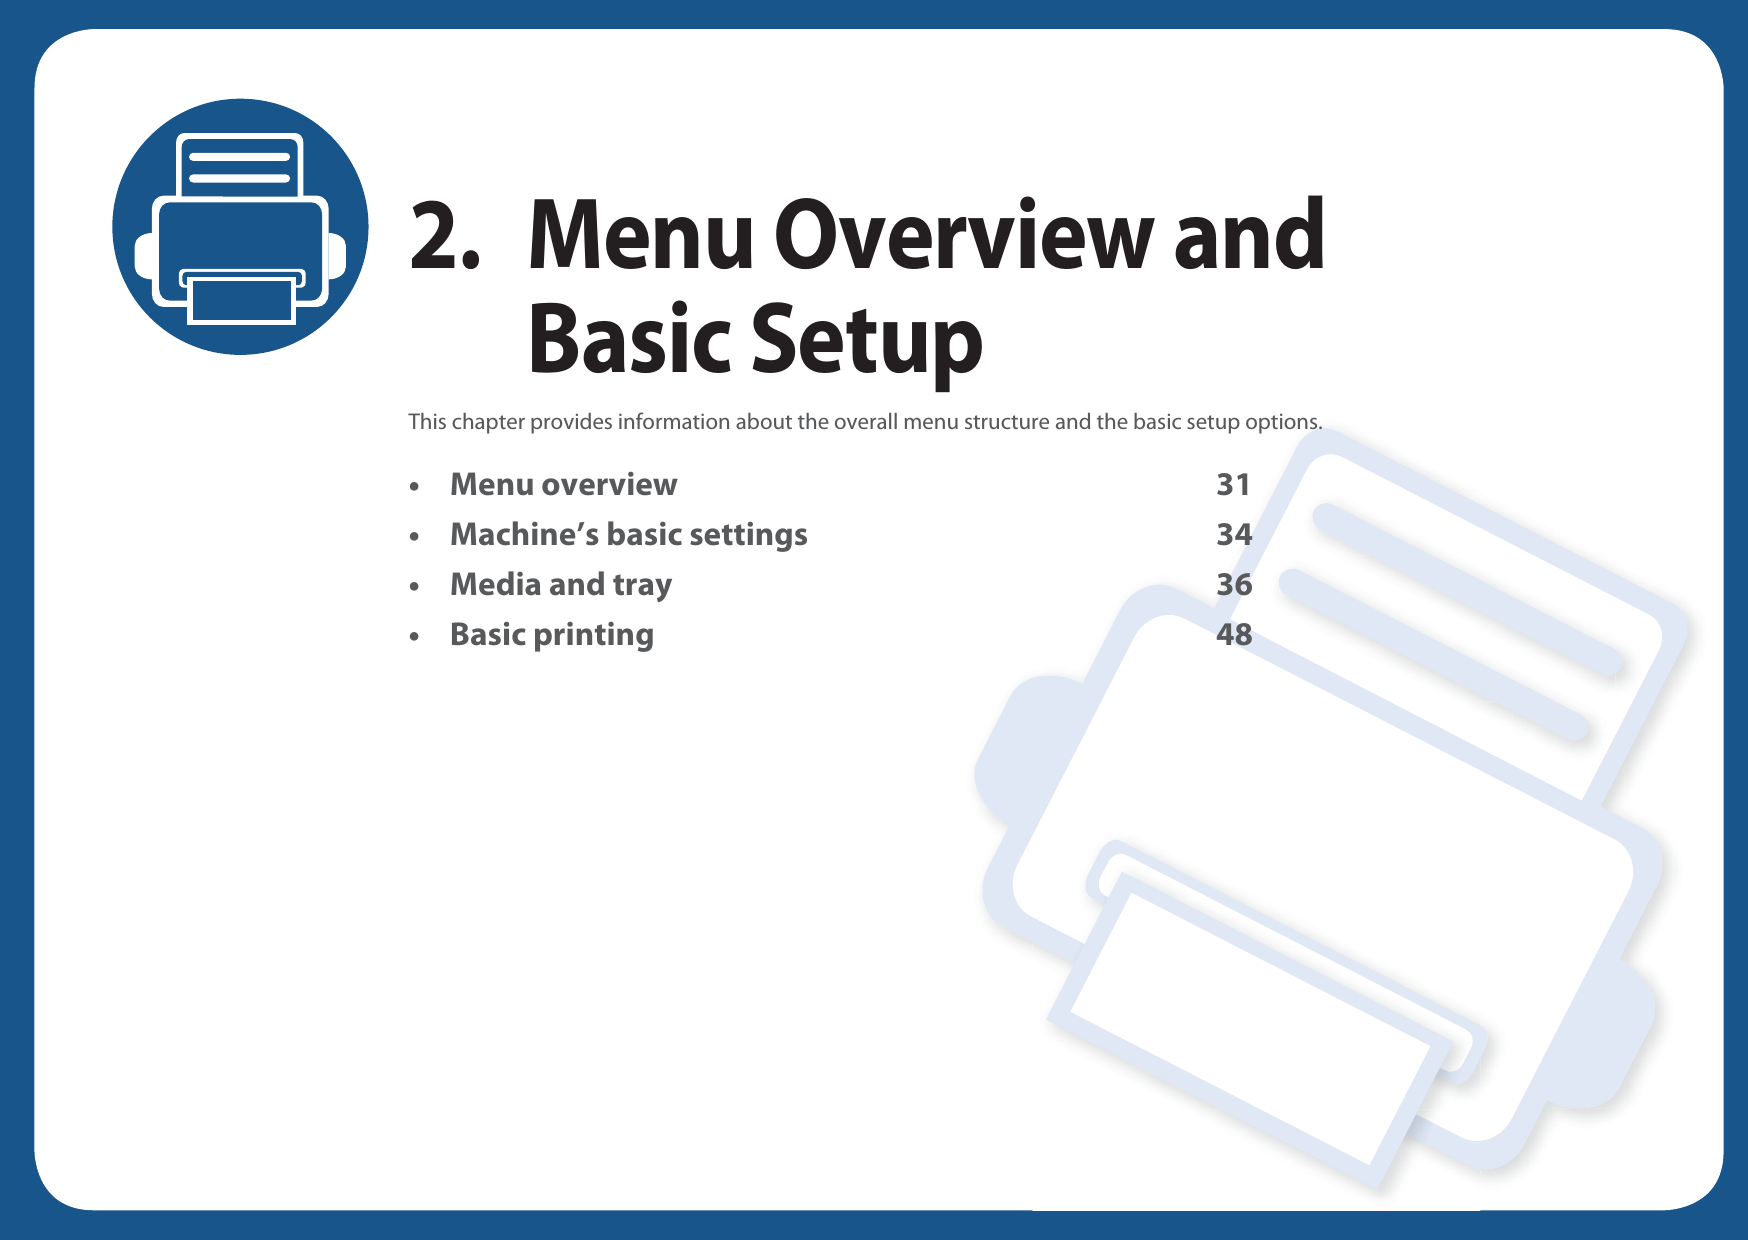 2. Menu Overview and Basic SetupThis chapter provides information about the overall menu structure and the basic setup options.• Menu overview 31• Machine’s basic settings 34• Media and tray 36• Basic printing 48